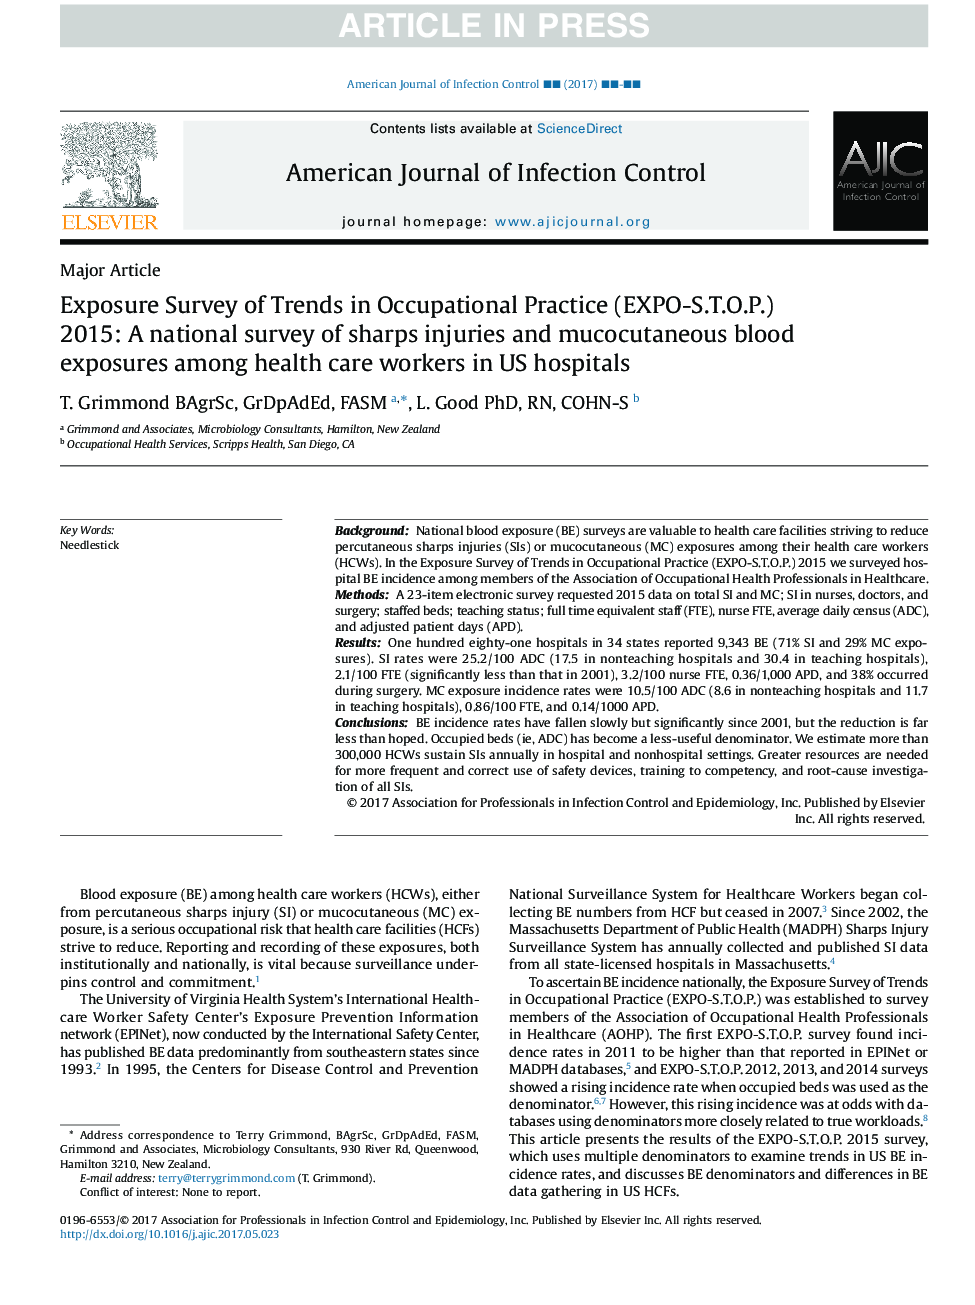 Exposure Survey of Trends in Occupational Practice (EXPO-S.T.O.P.) 2015: A national survey of sharps injuries and mucocutaneous blood exposures among health care workers in US hospitals